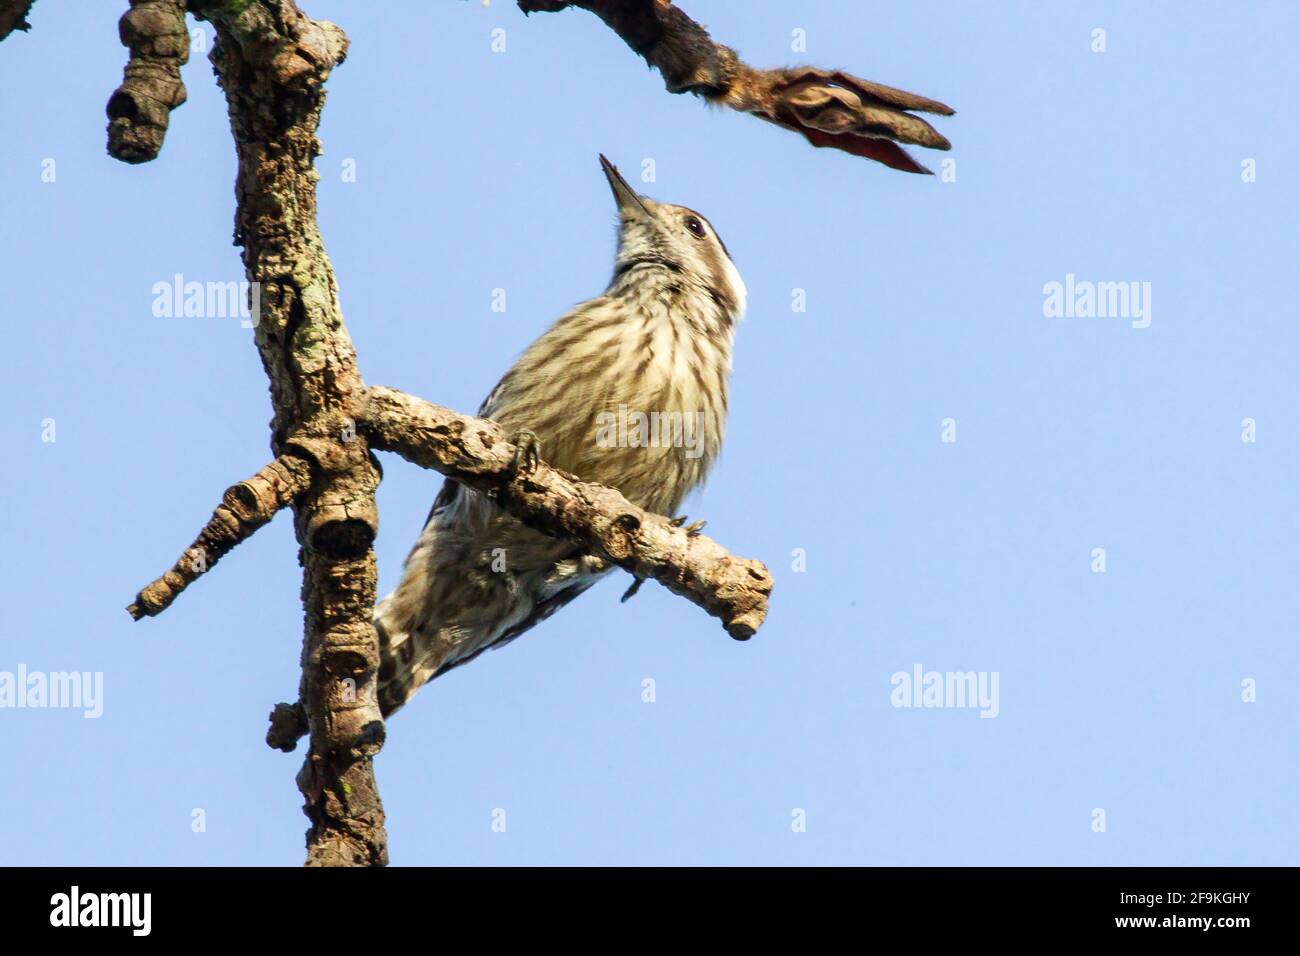 grey-capped pygmy woodpecker, Yungipicus canicapillus, single adult perched on branch of tree, Yok Dom, Vietnam Stock Photo